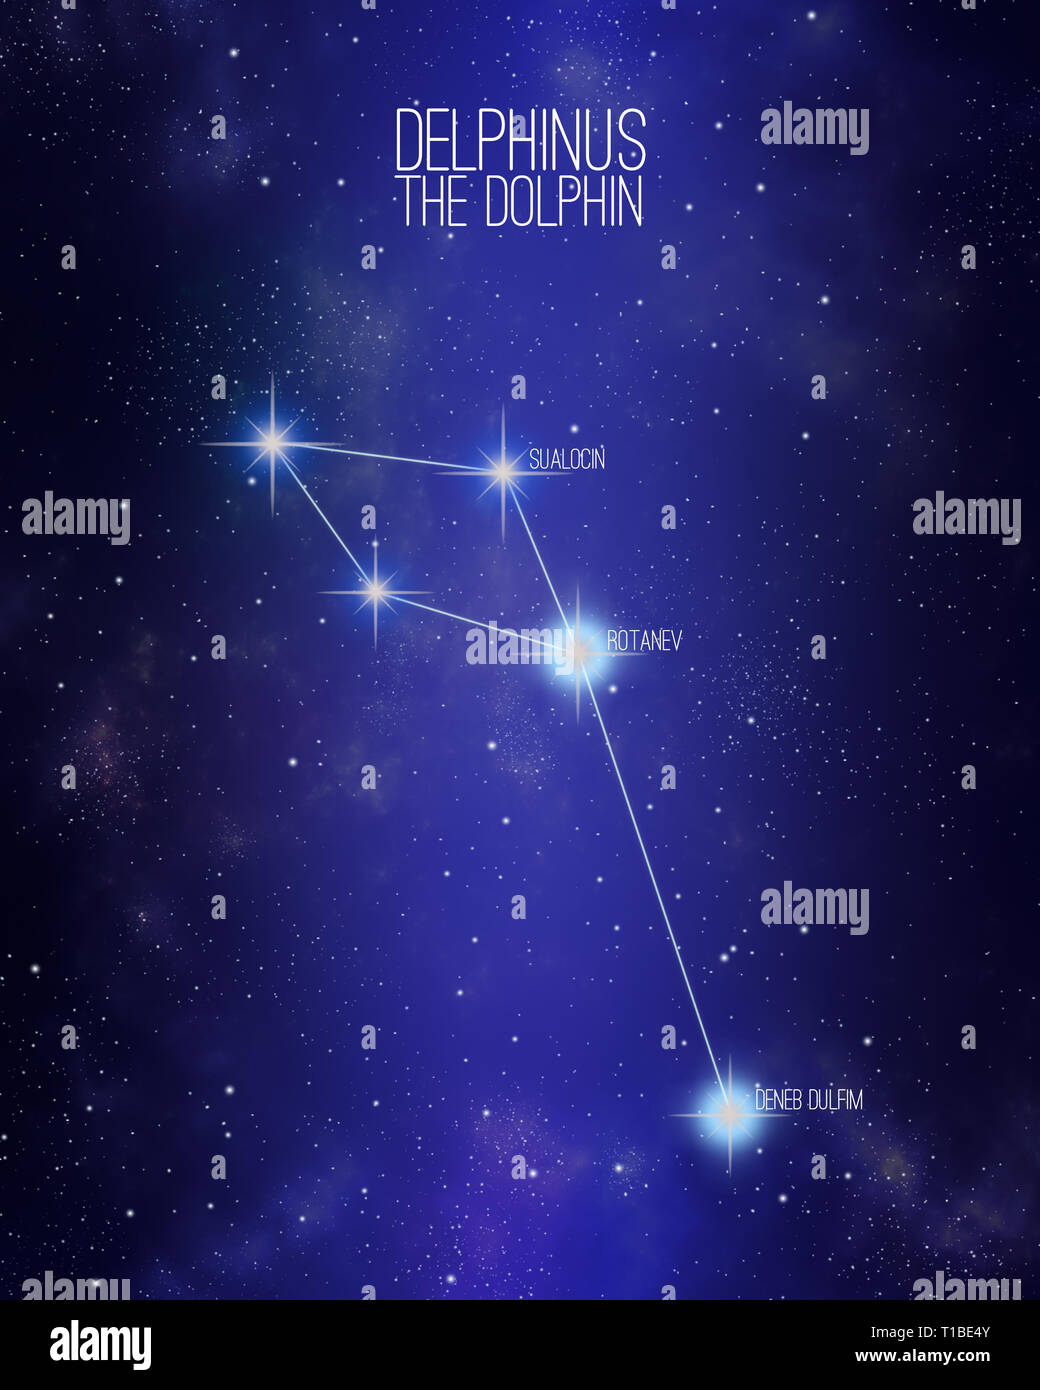 Delphinus the dolfin constellation on a starry space background with the names of its main stars. Stock Photo